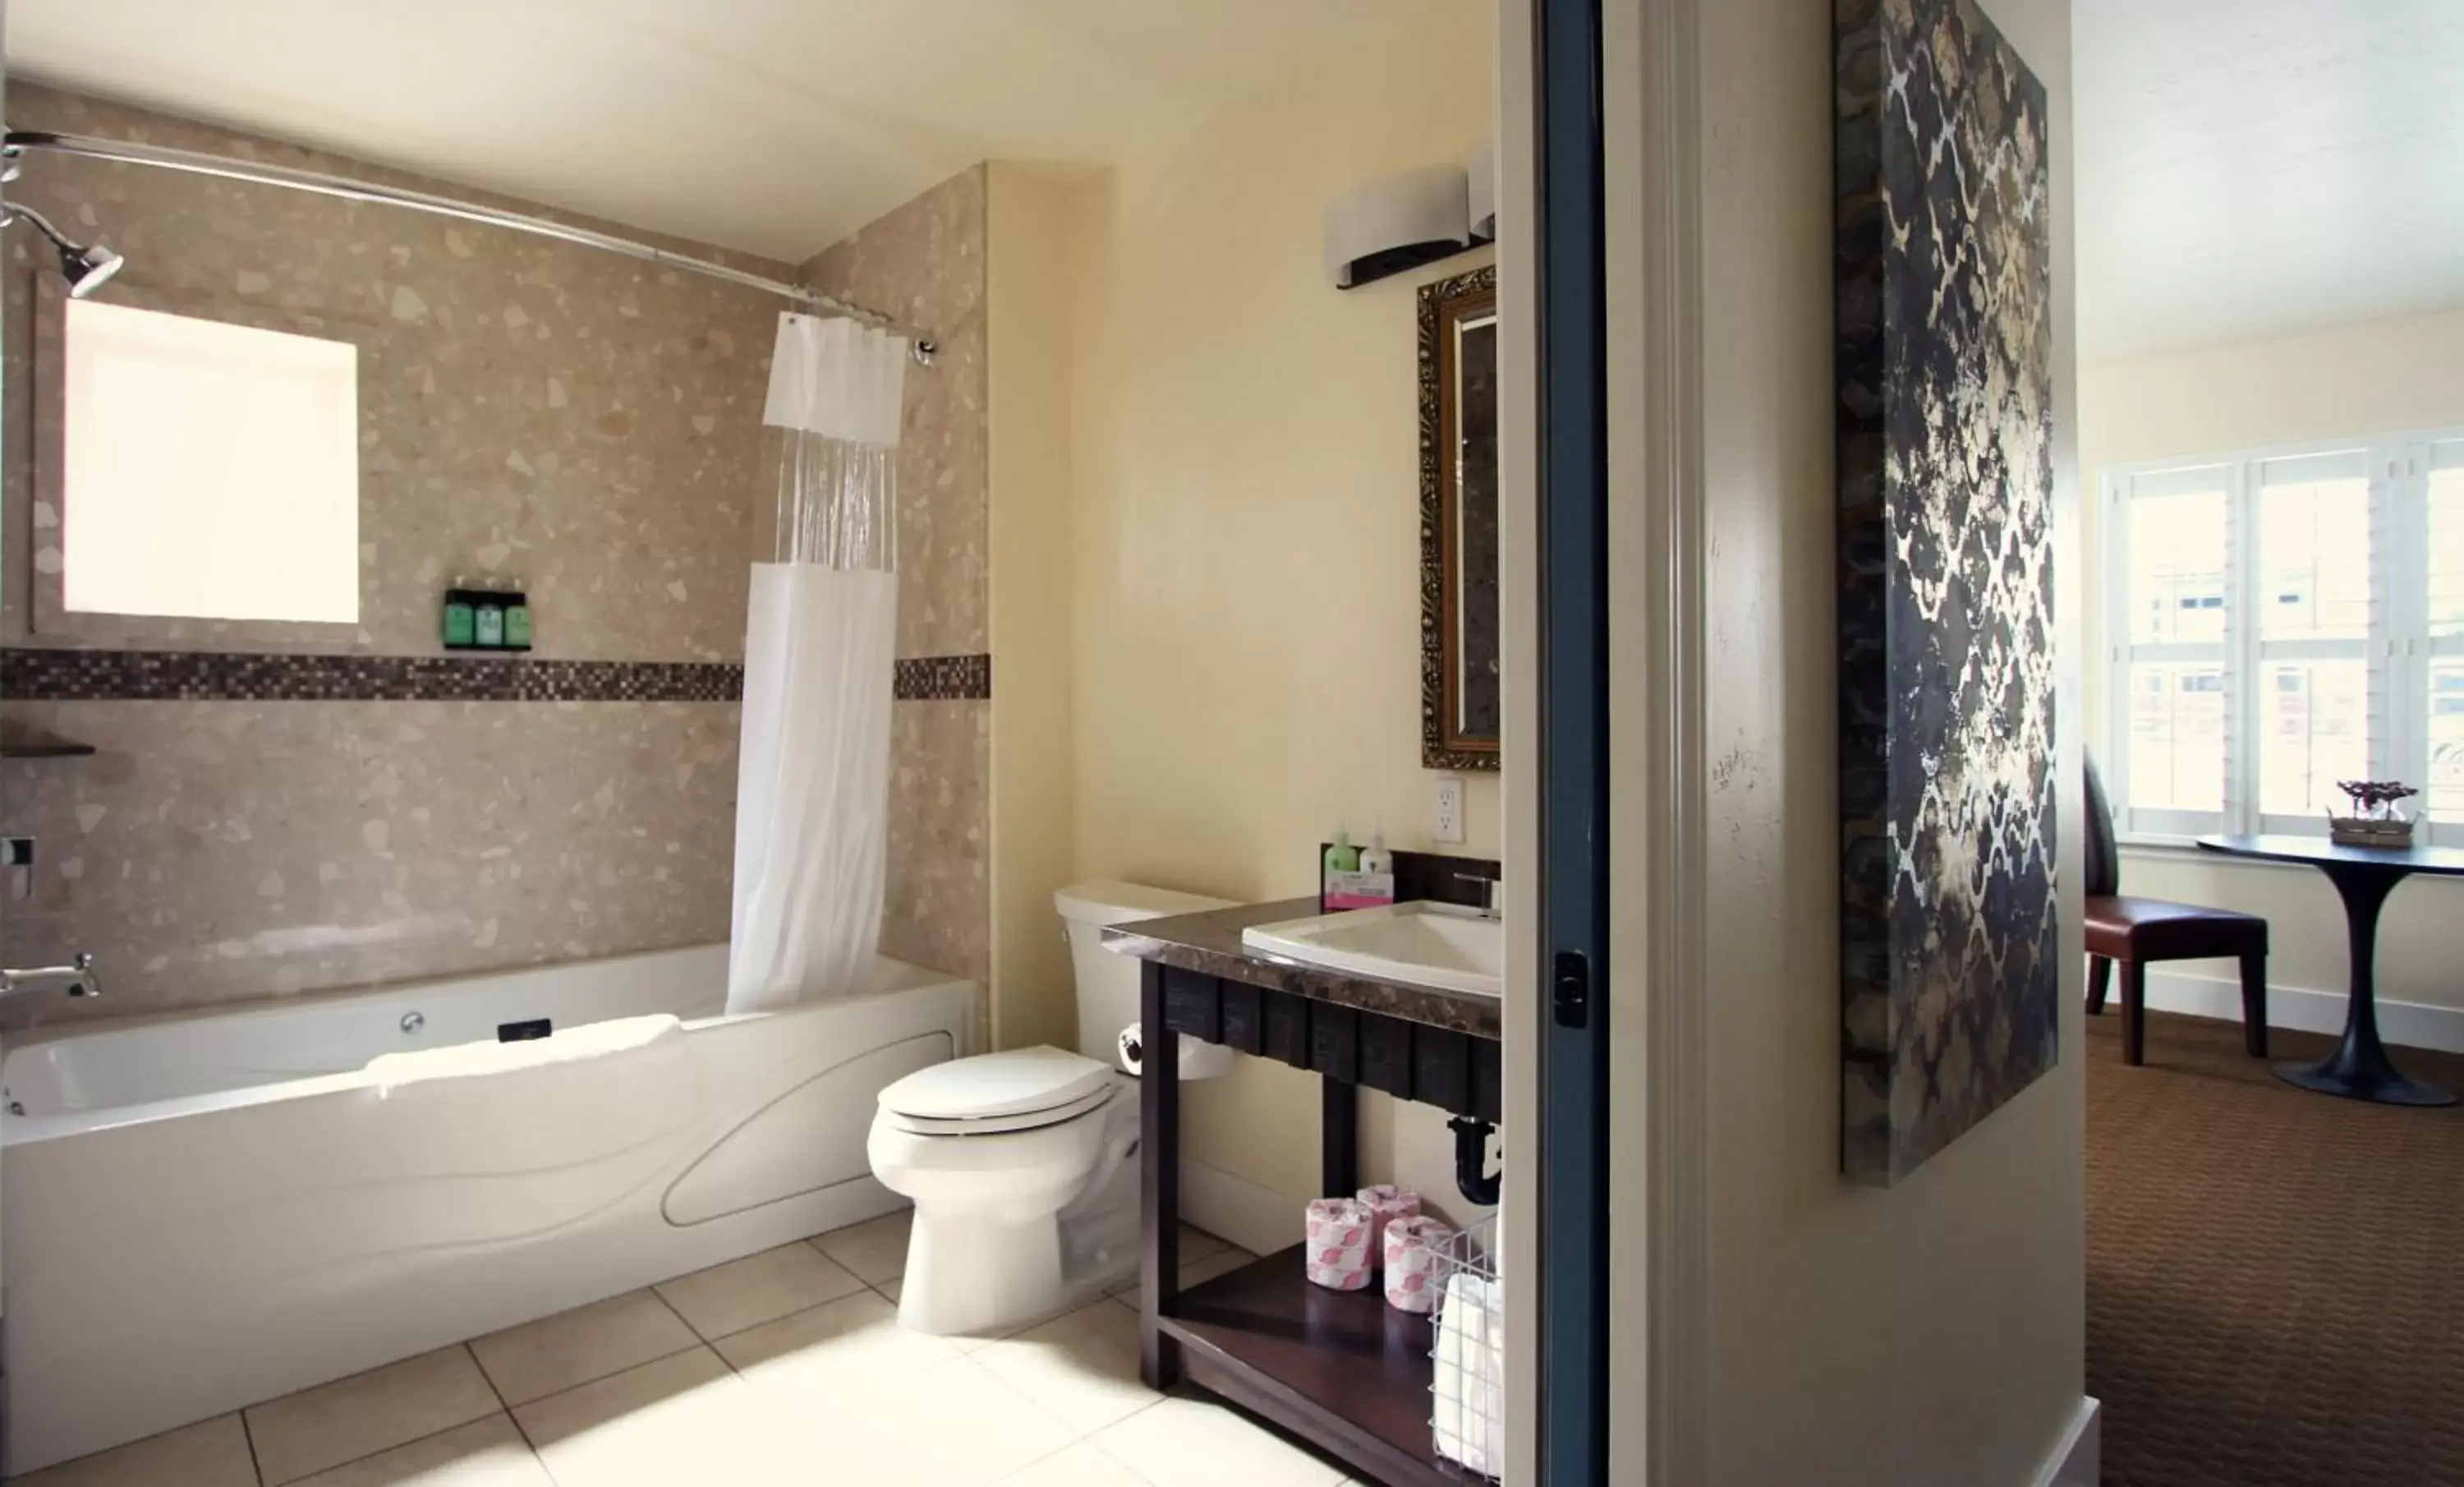 Bathroom in Rest, a boutique hotel